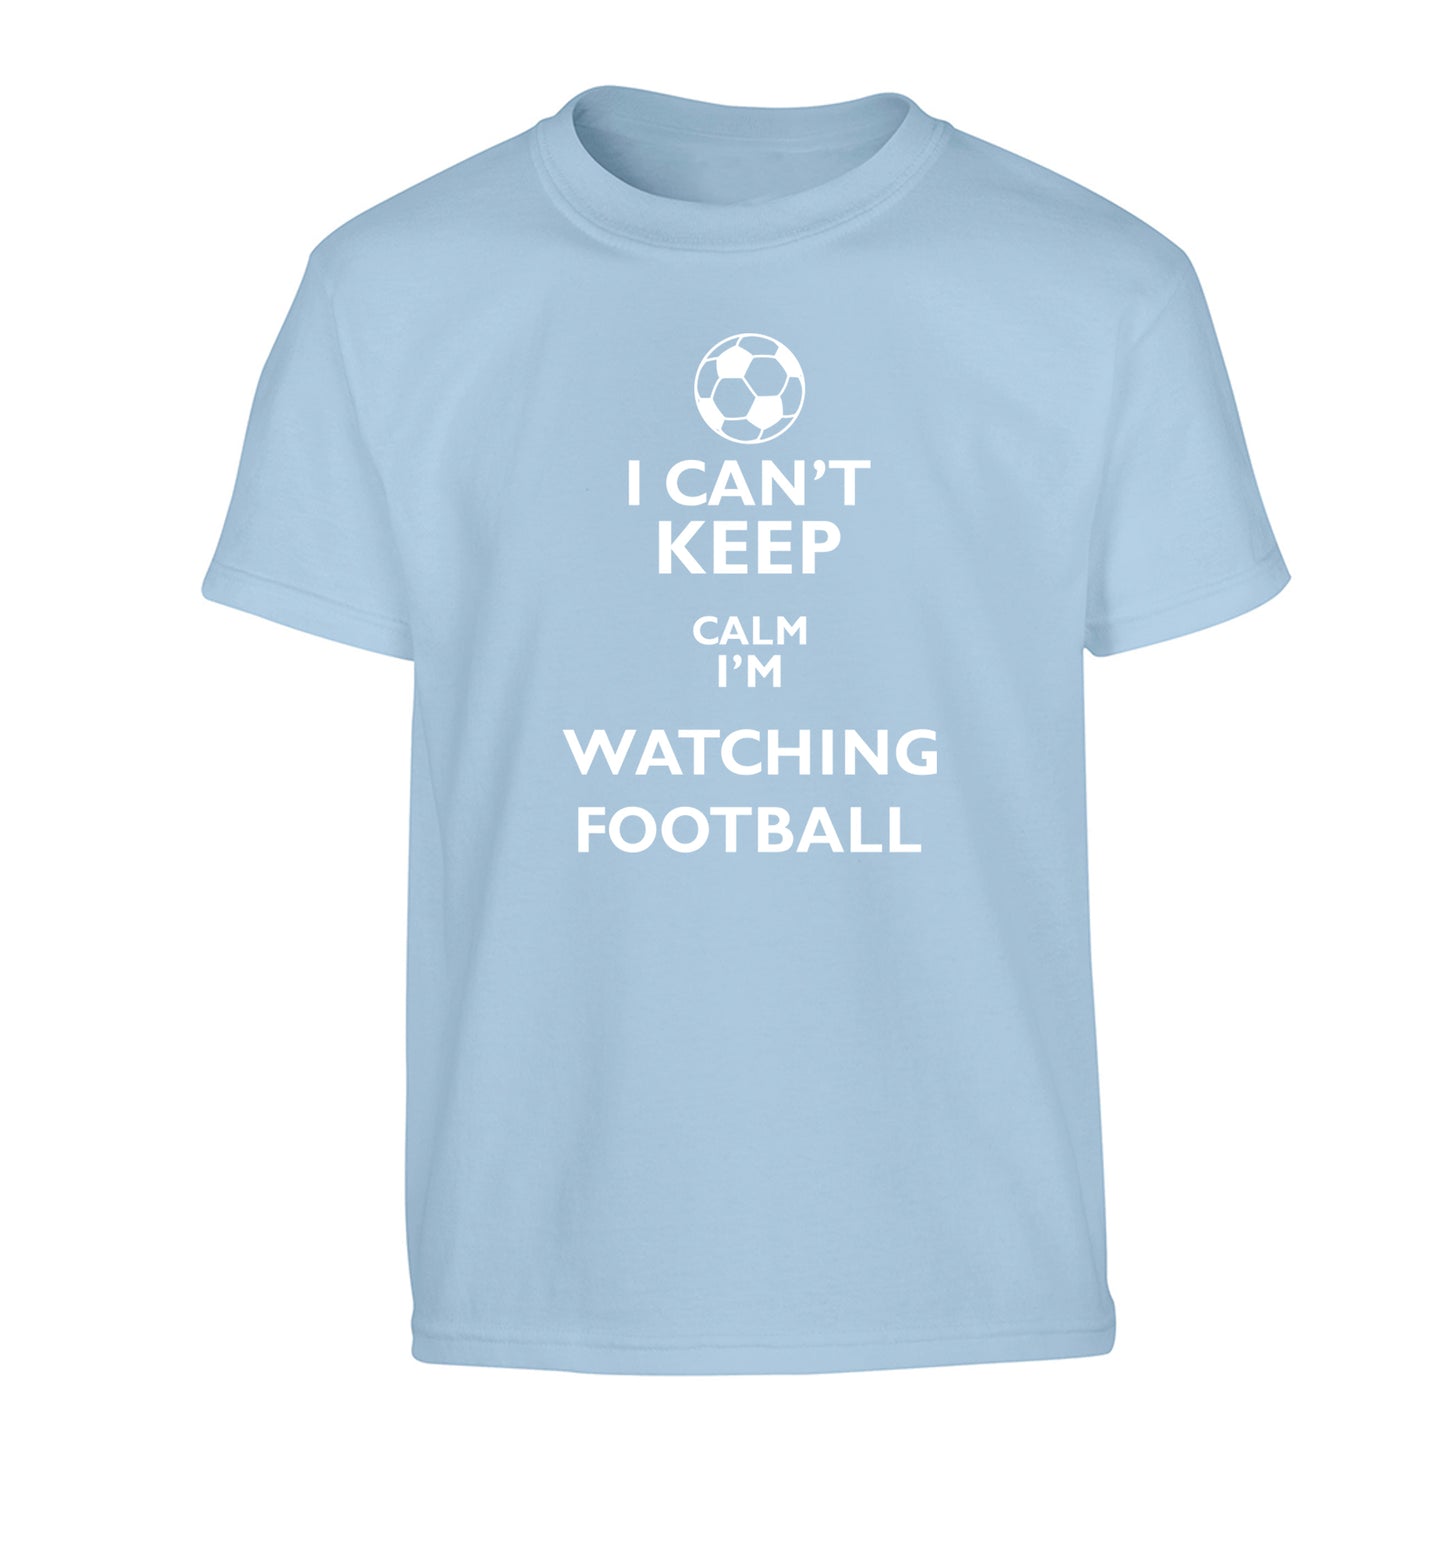 I can't keep calm I'm watching the football Children's light blue Tshirt 12-14 Years